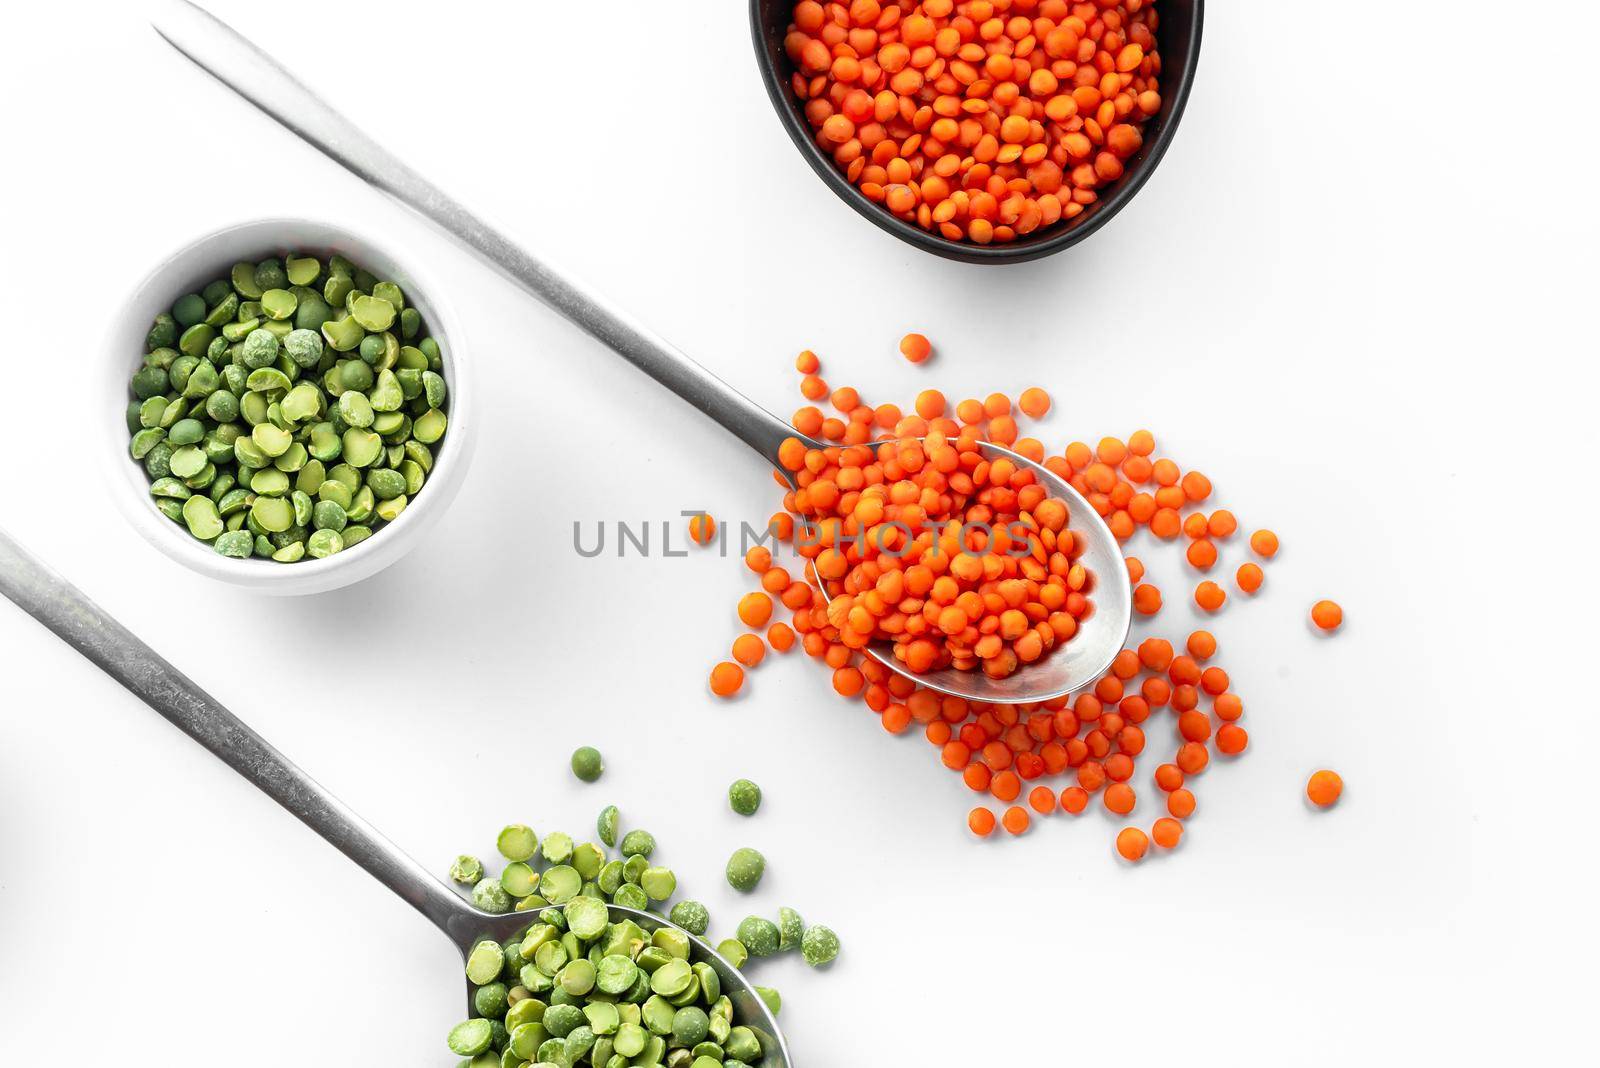 Red Lentils and green peas on a white background. superfood healthy food alternative to basic cereals. Gluten free. by gulyaevstudio